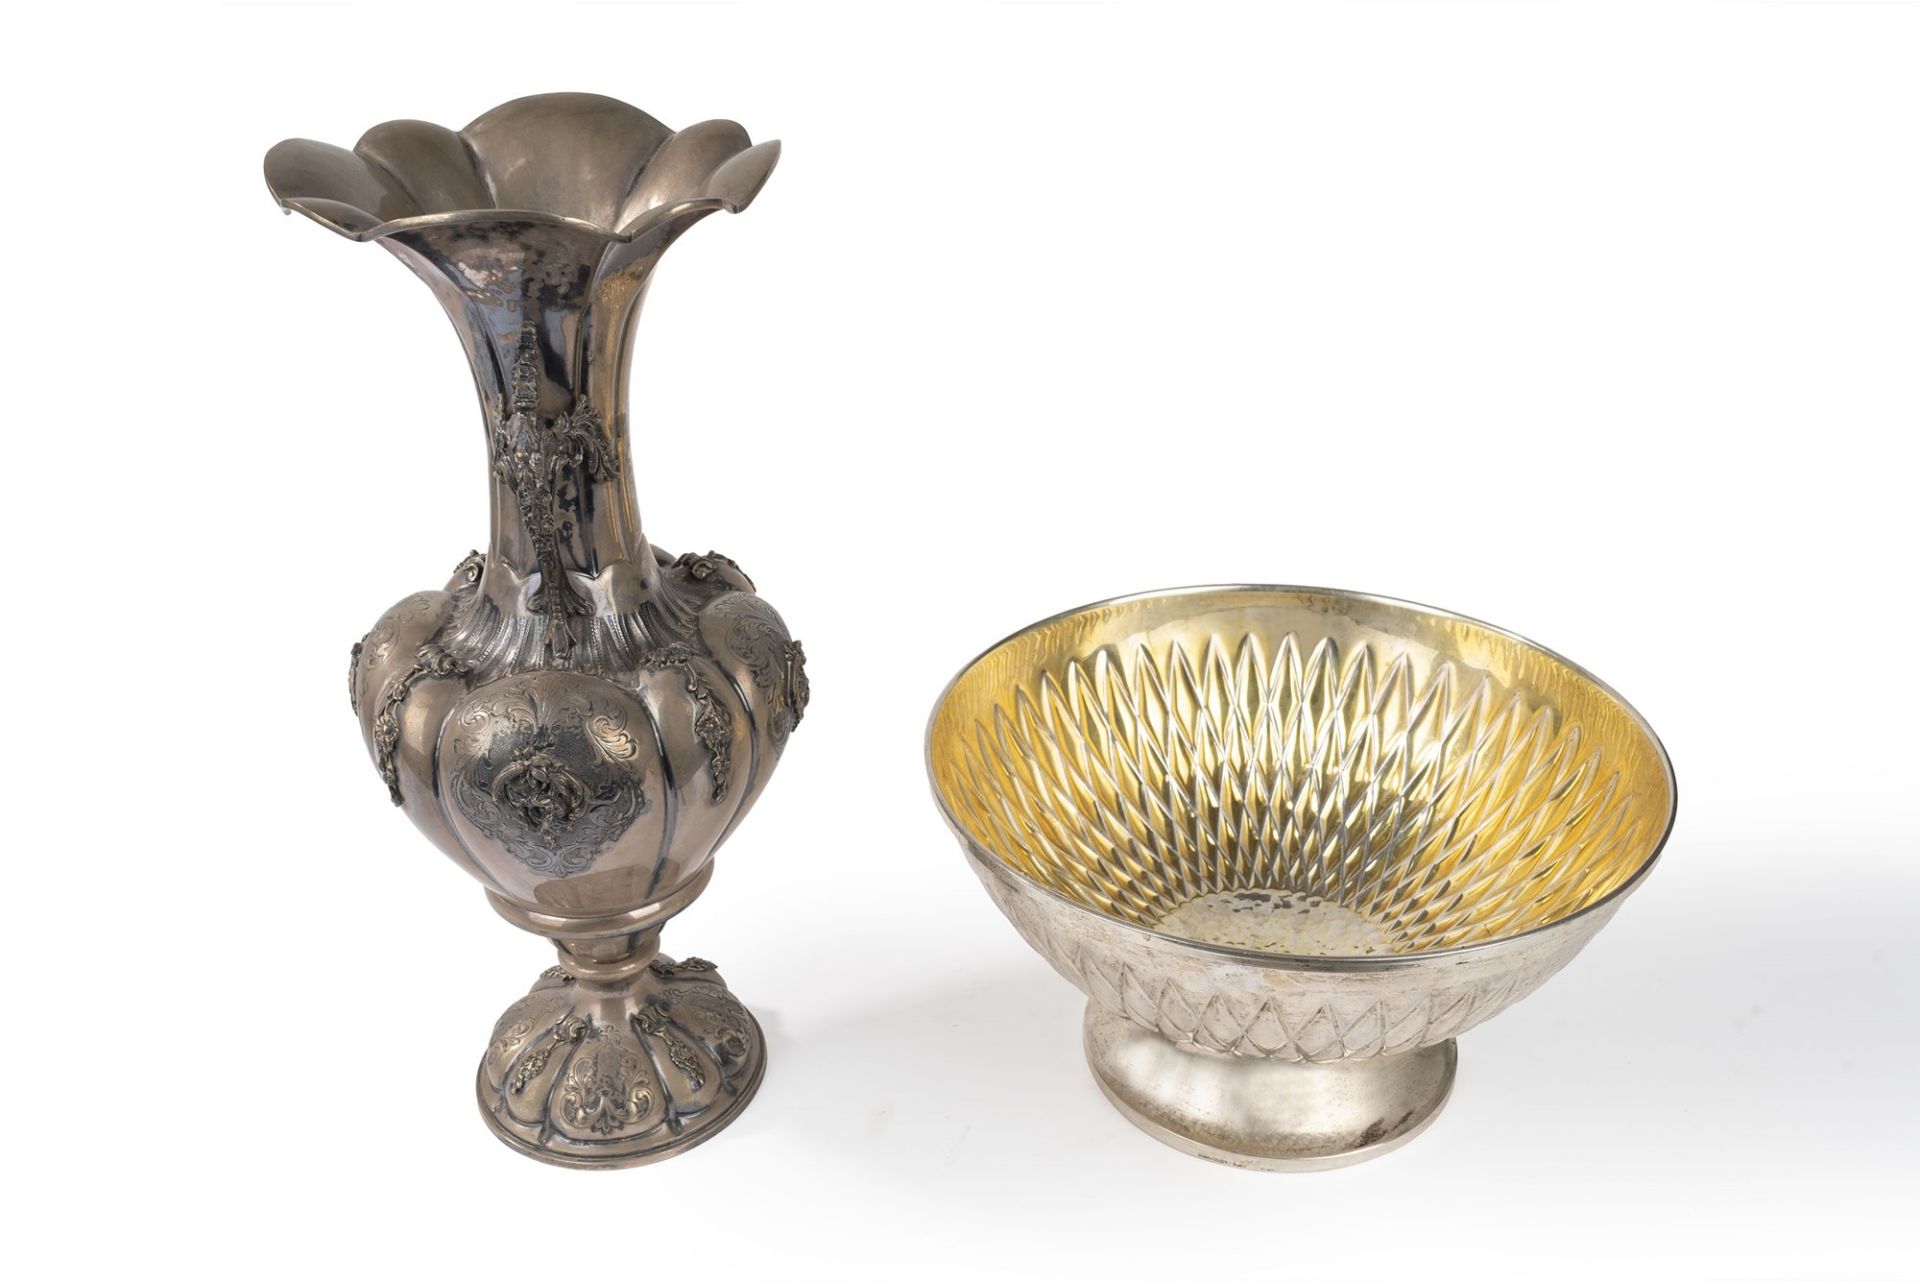 Lot made of a silver vase and centrepiece, 20th century - Image 2 of 2